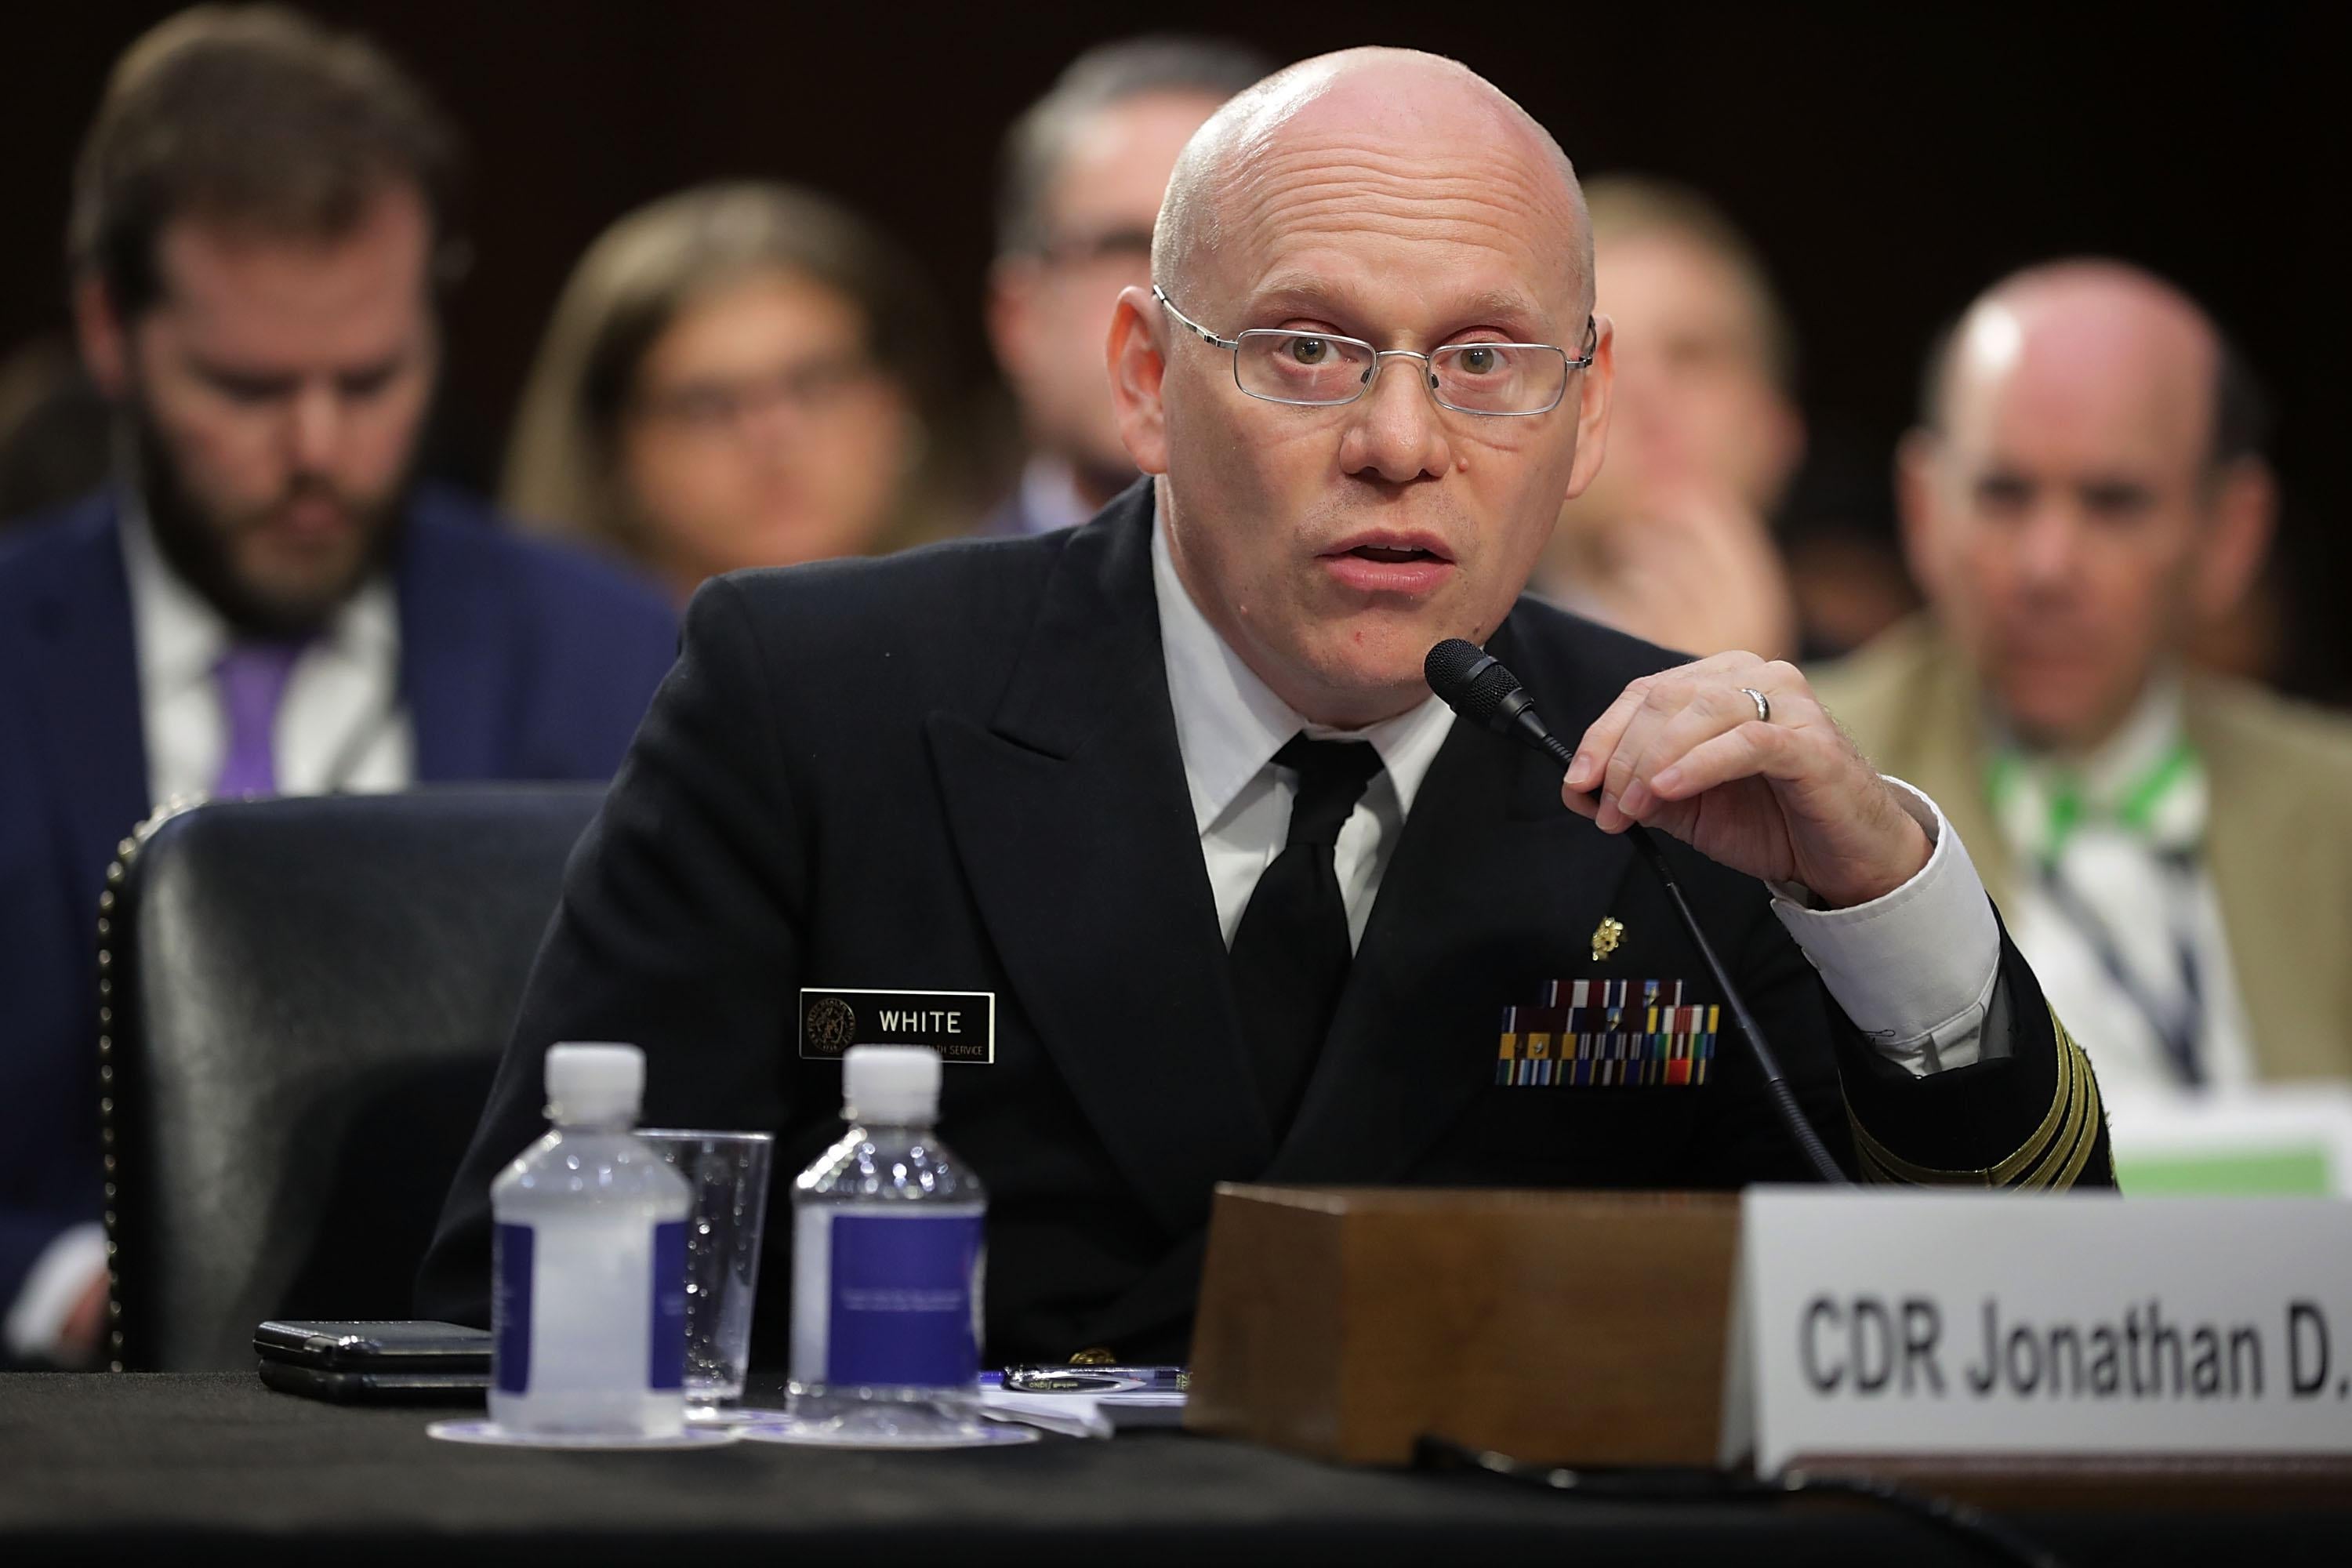 Commander Jonathan White testified that he warned the Trump administration about the likely effect on children of family separation.